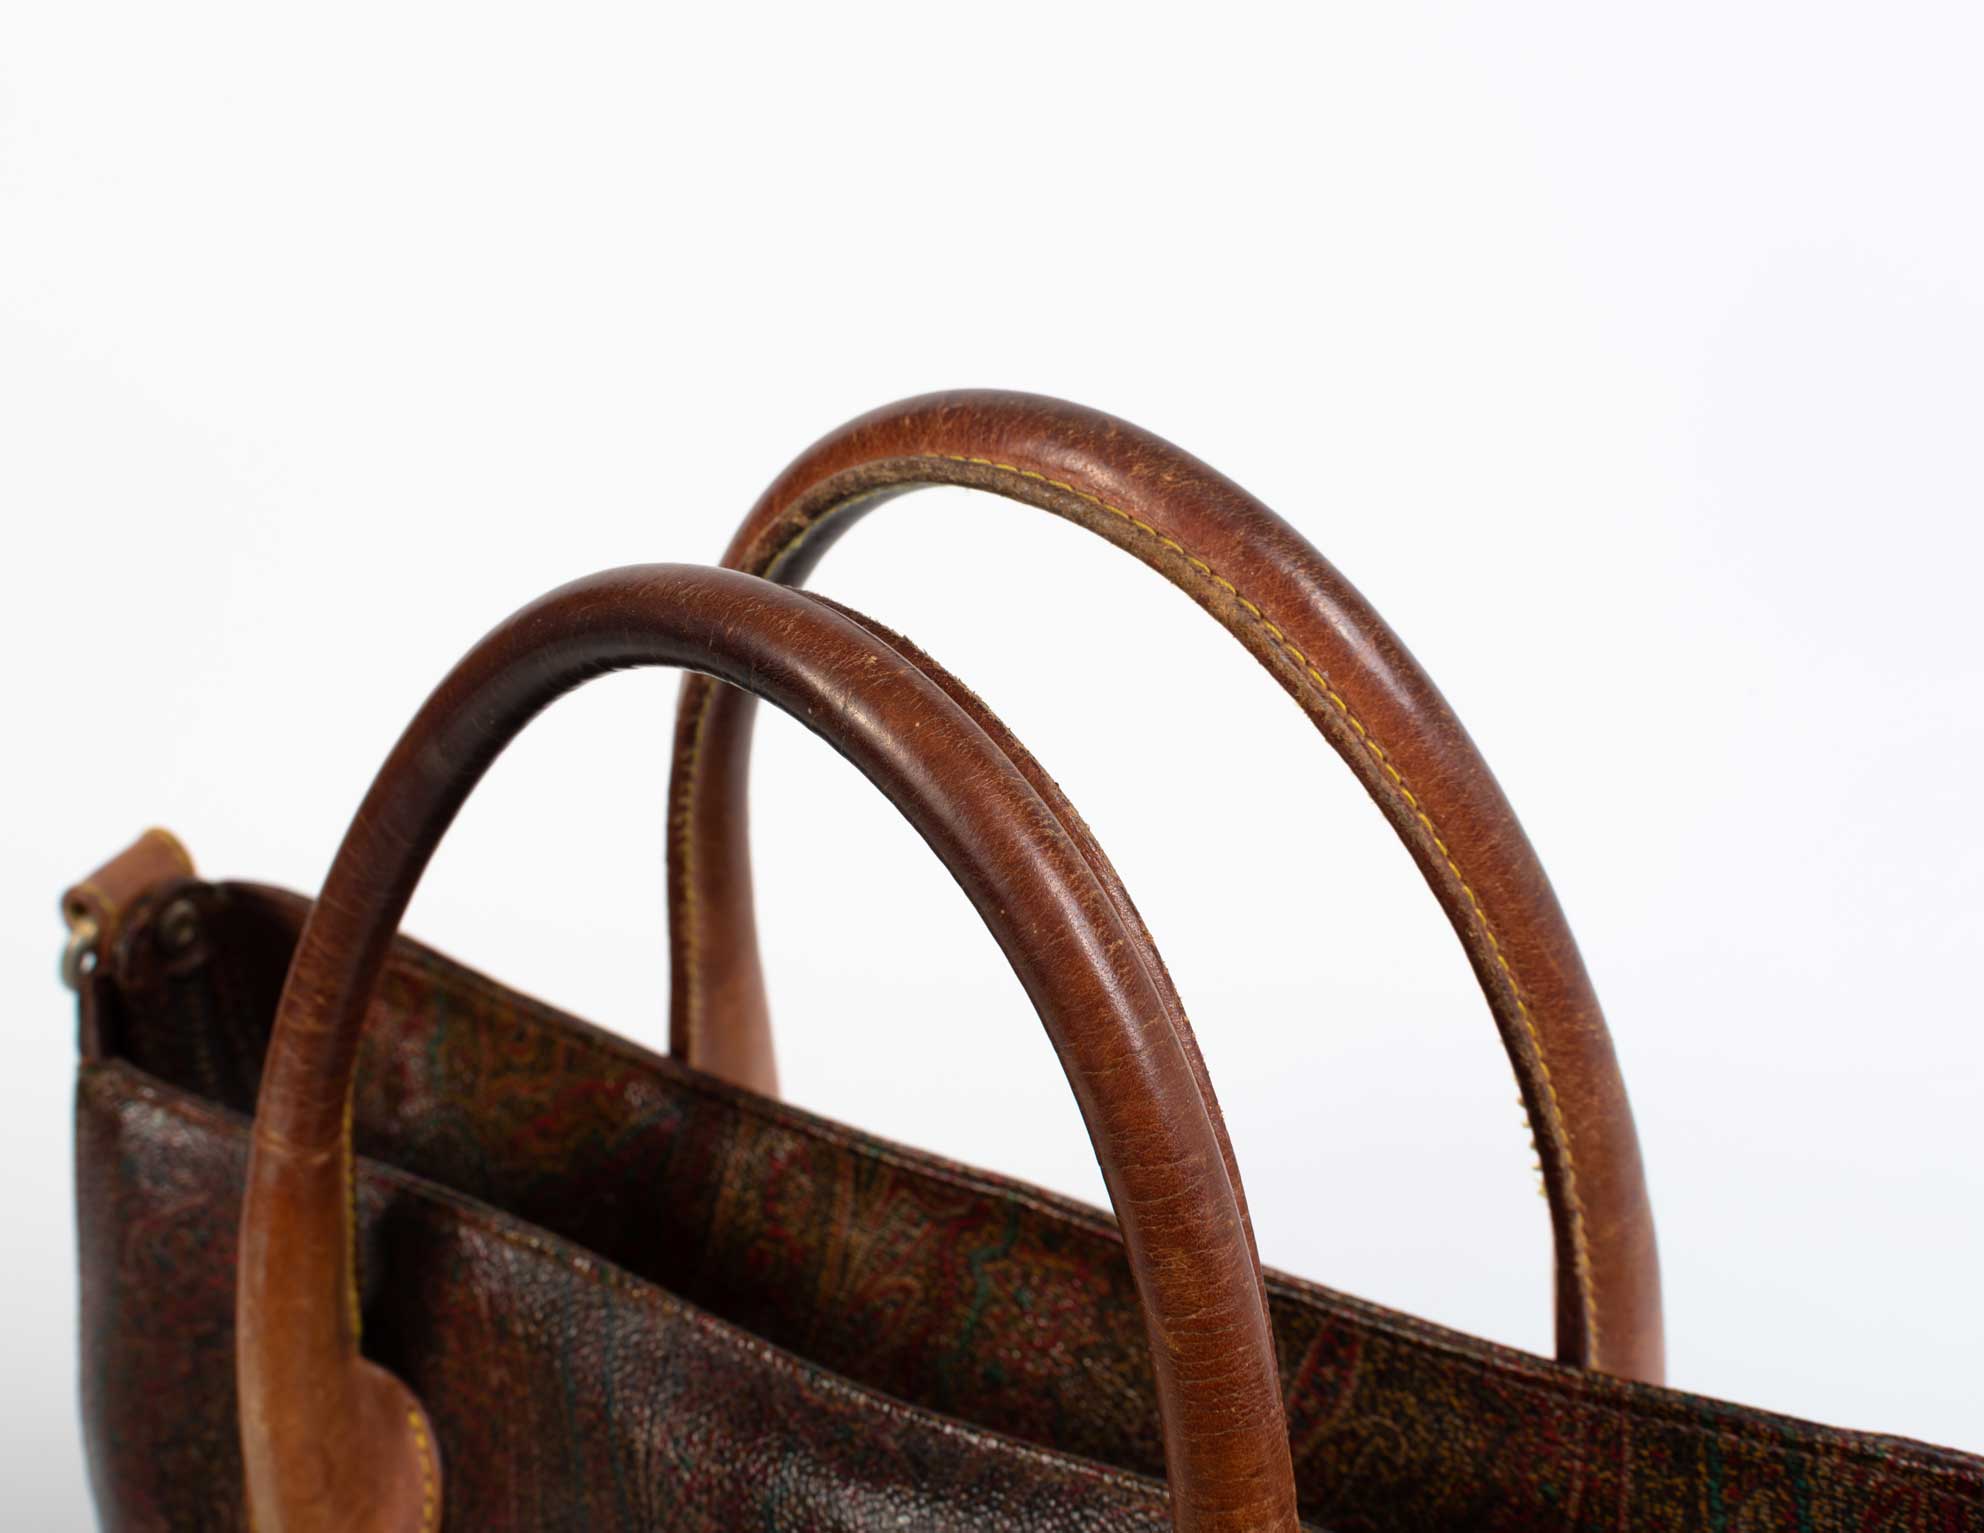 Etro Boston Bag in Brown Paisley Printed Coated Canvas and Leather Trim